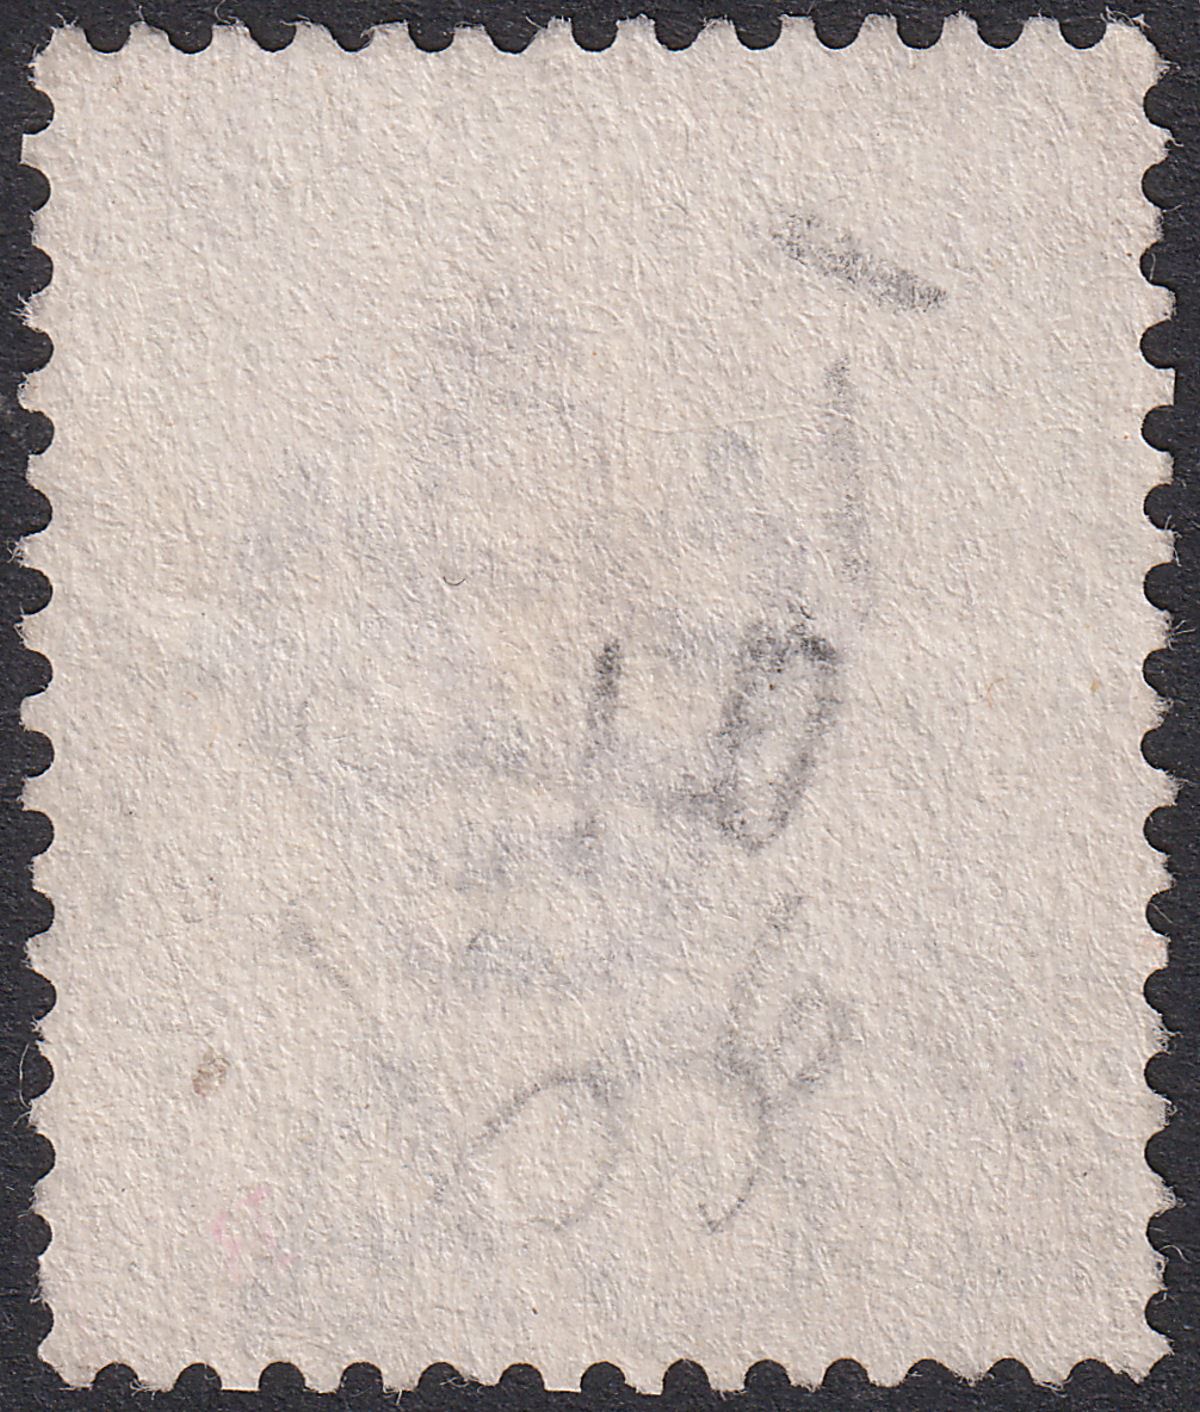 Hong Kong 1882 QV 10c Dull Mauve Used with D27 Postmark Amoy SG Z35 cat £50